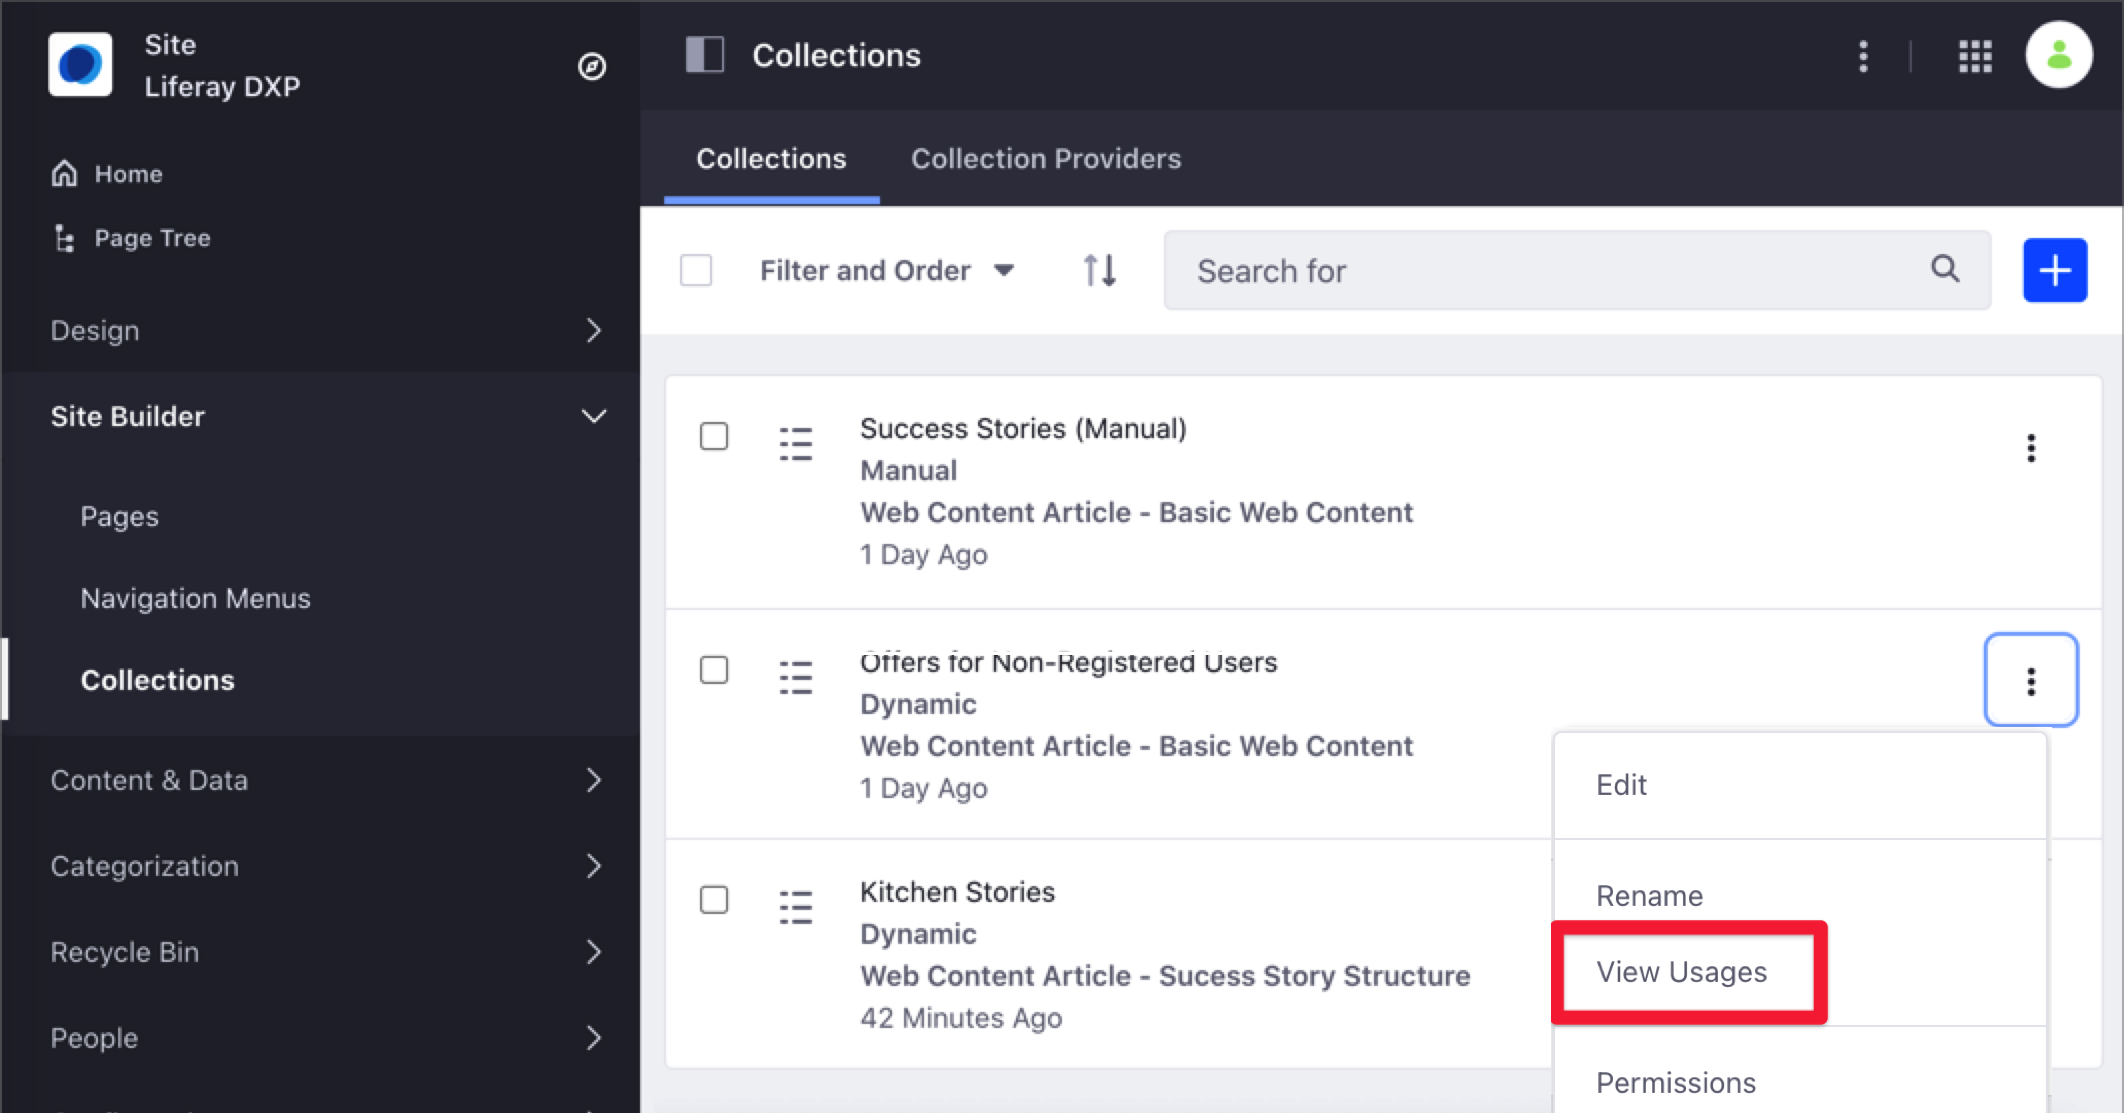 Select View Usages to understand how your collections are being used through the site